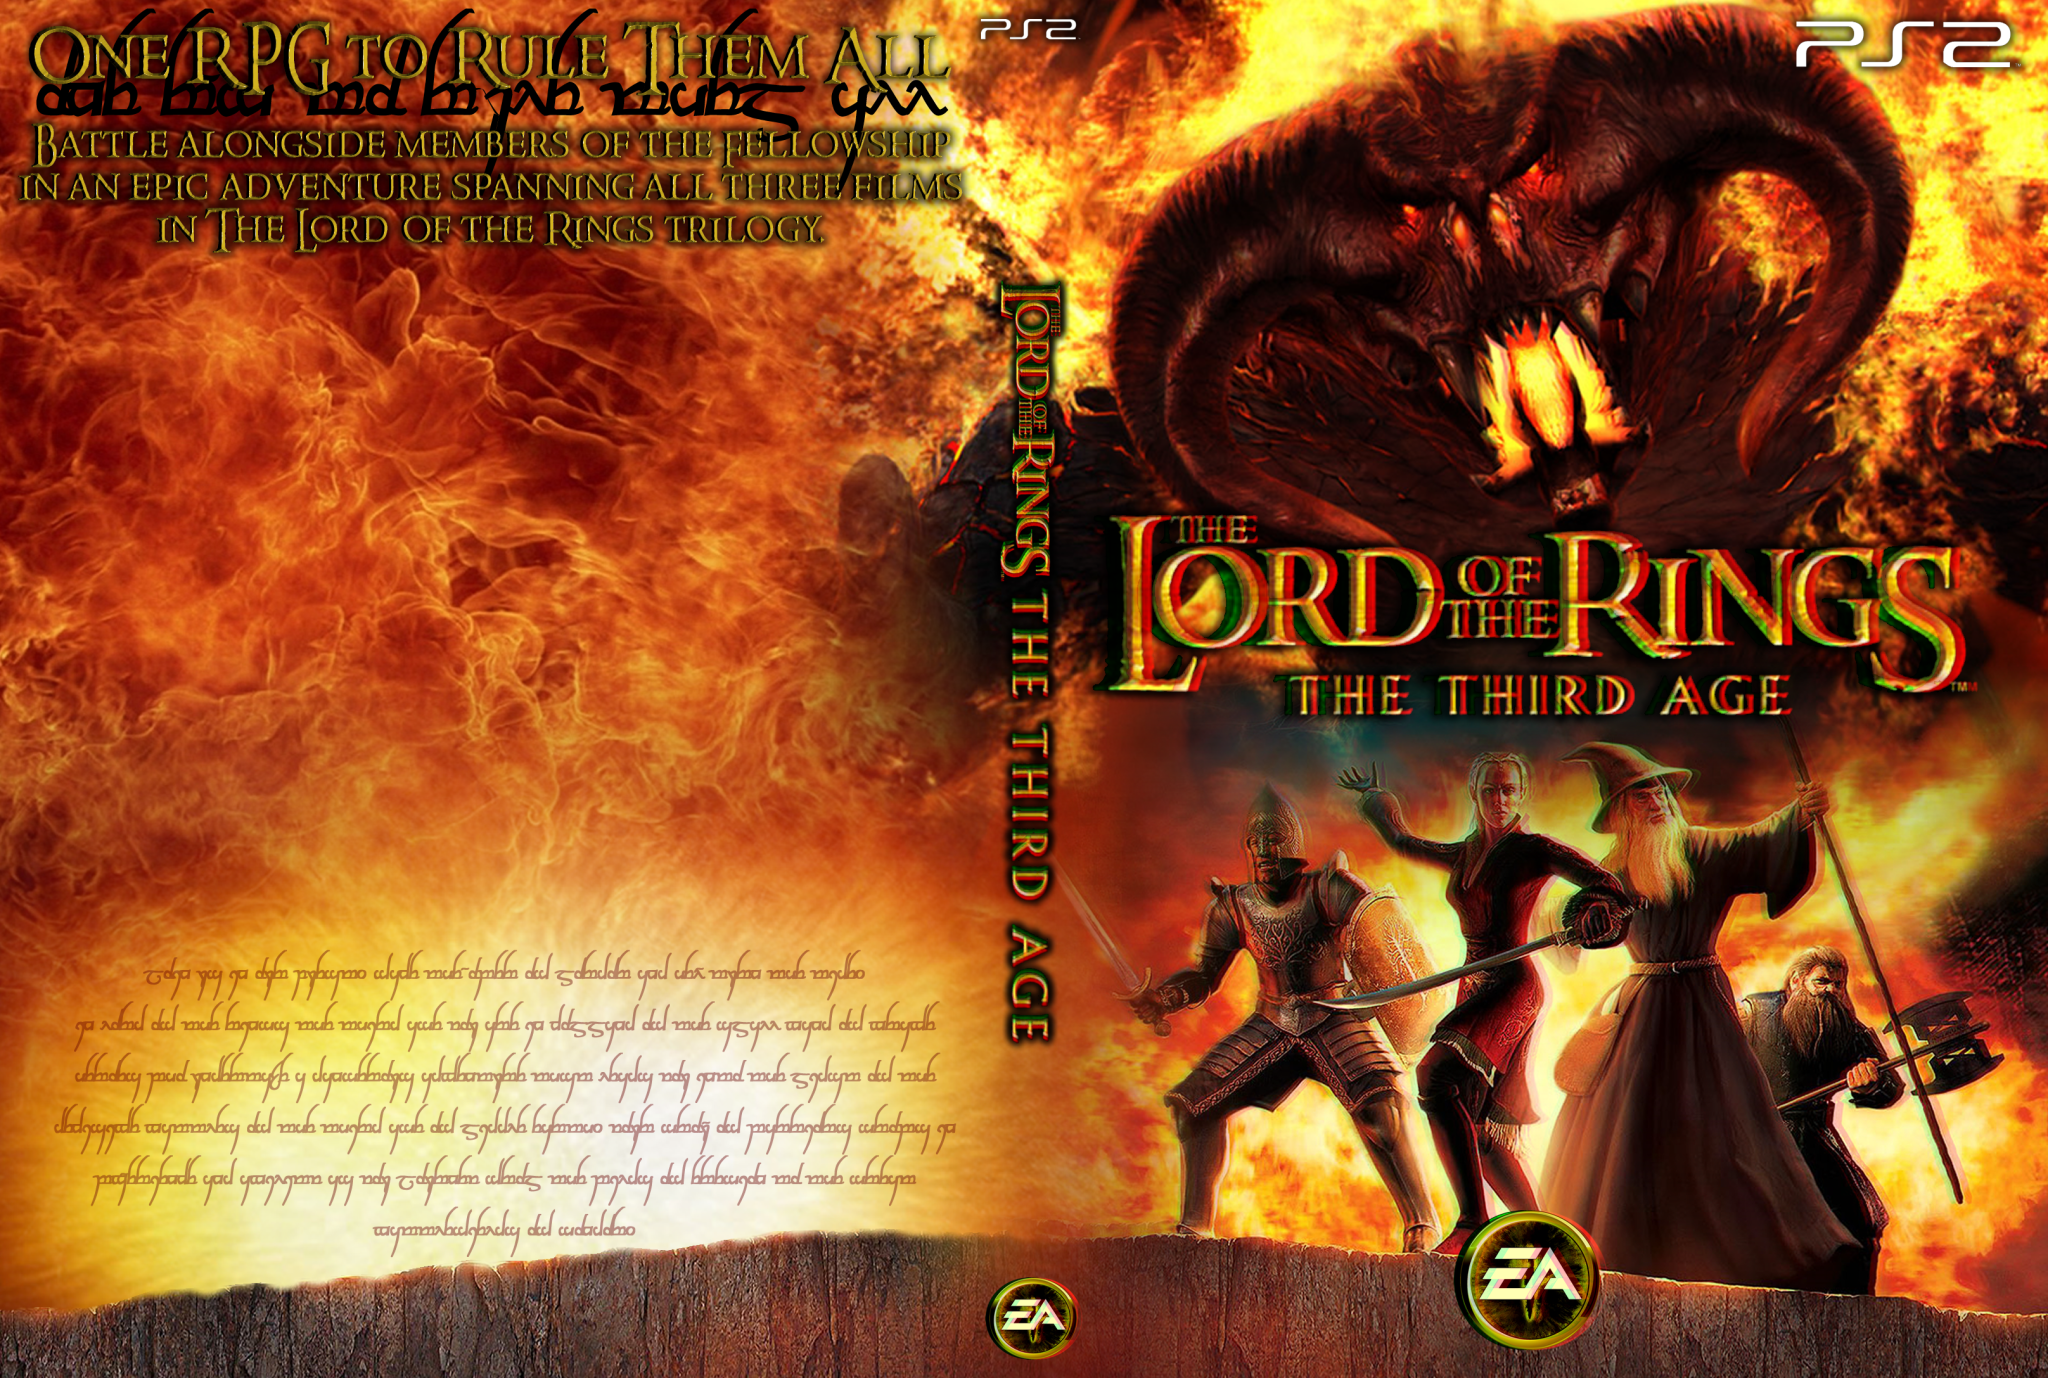 The Lord Of The Rings: The Third Age #19